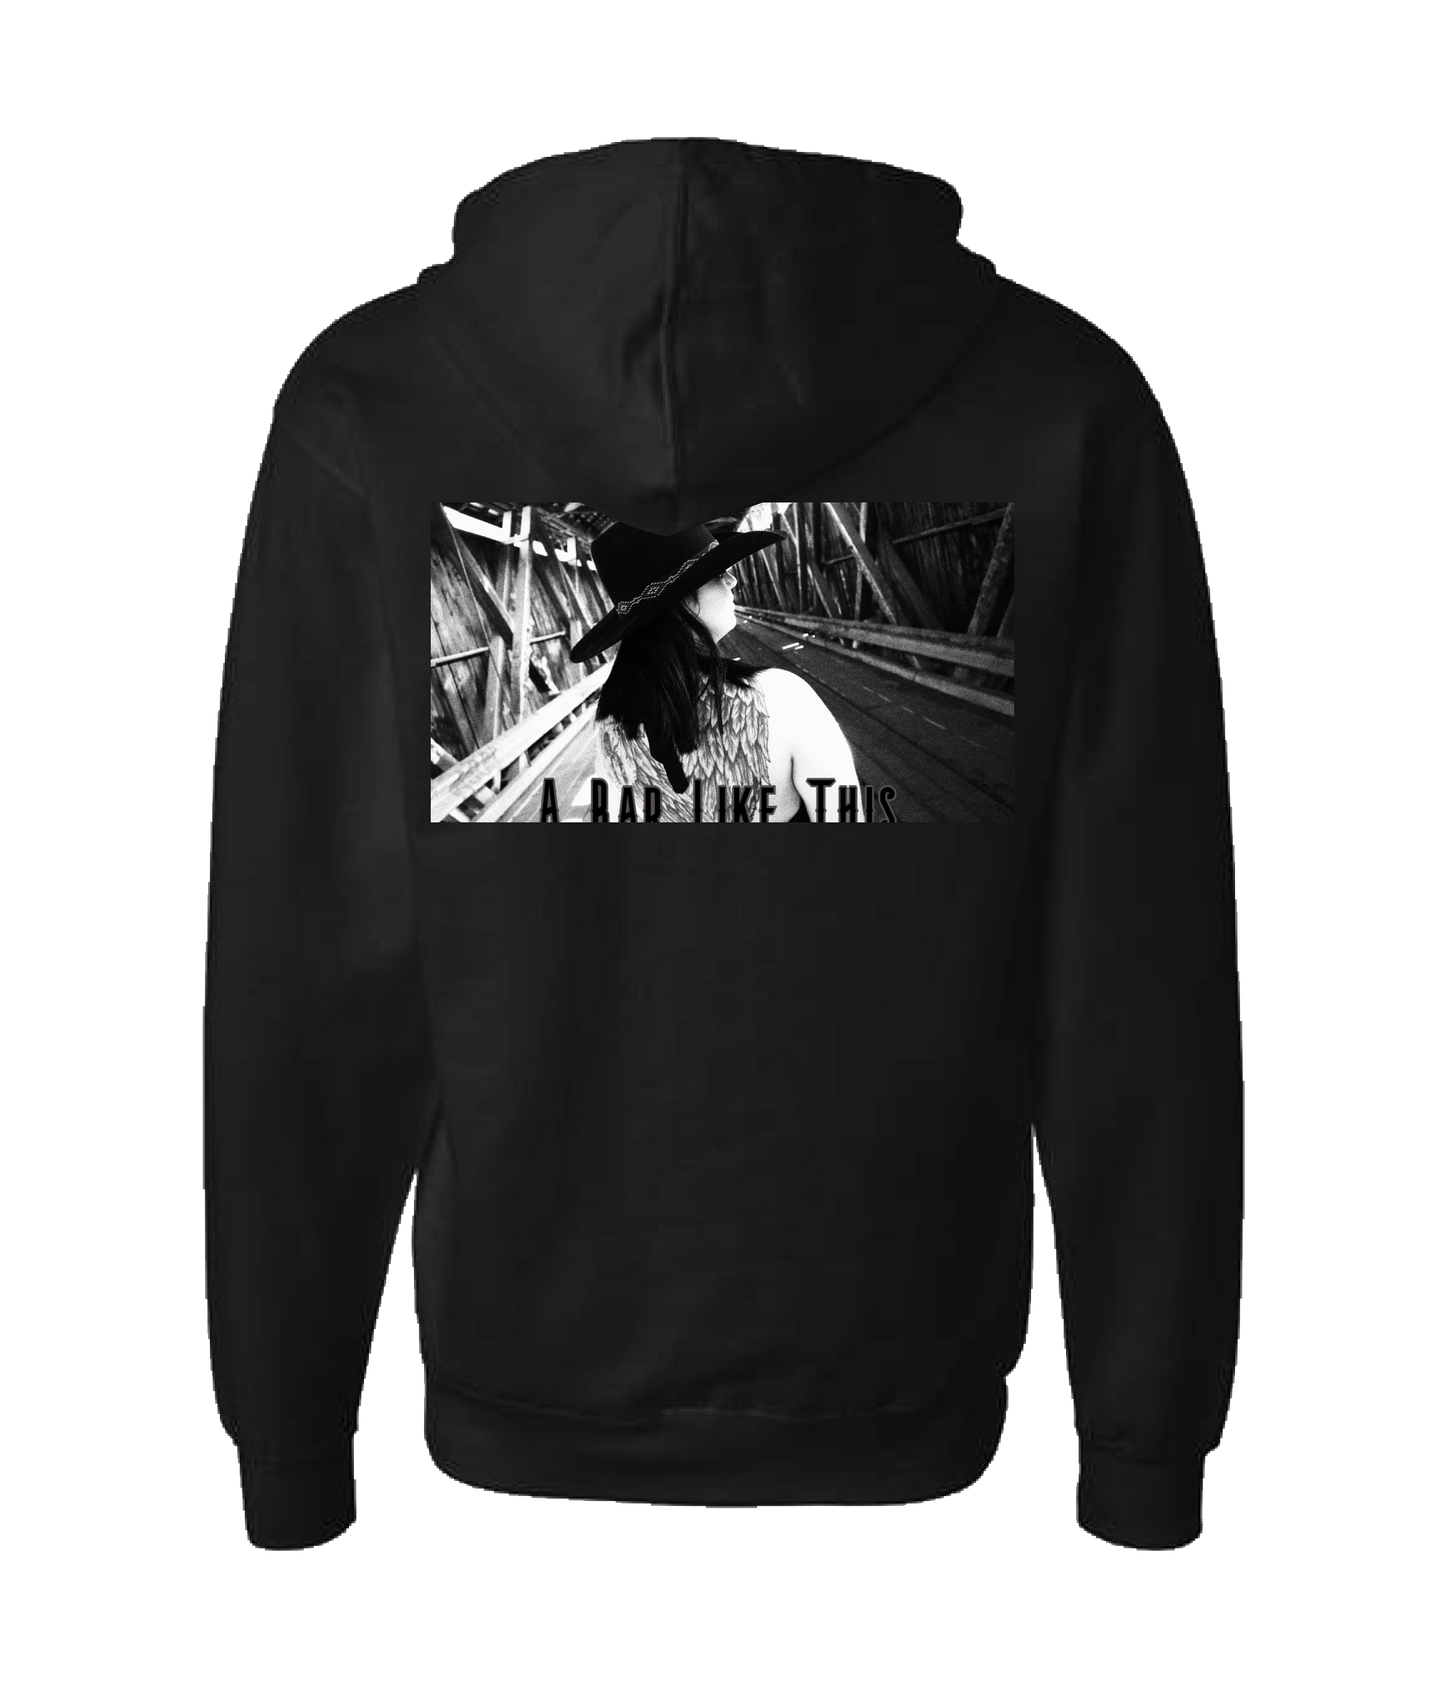 Michael Cage - A Bar Like This - Black Zip Up Hoodie